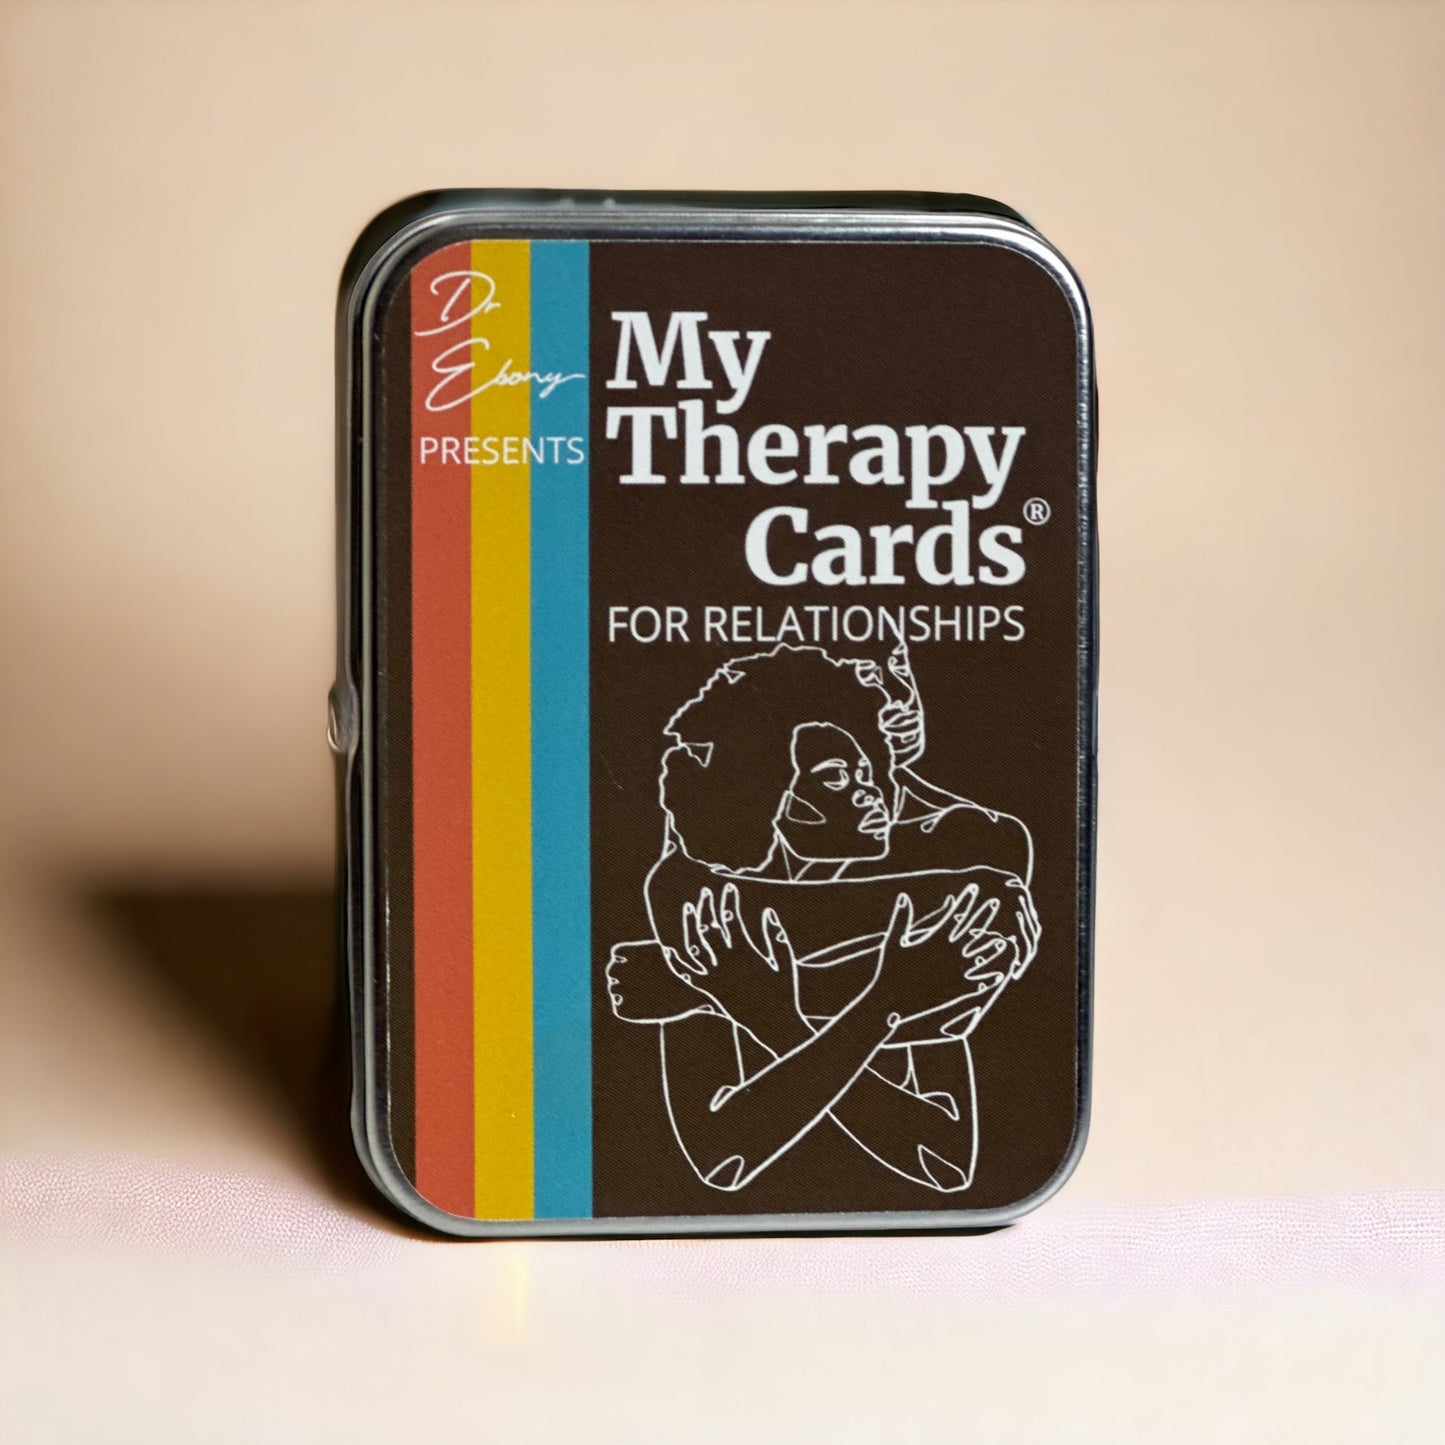 My Therapy Cards - RELATIONSHIP Edition